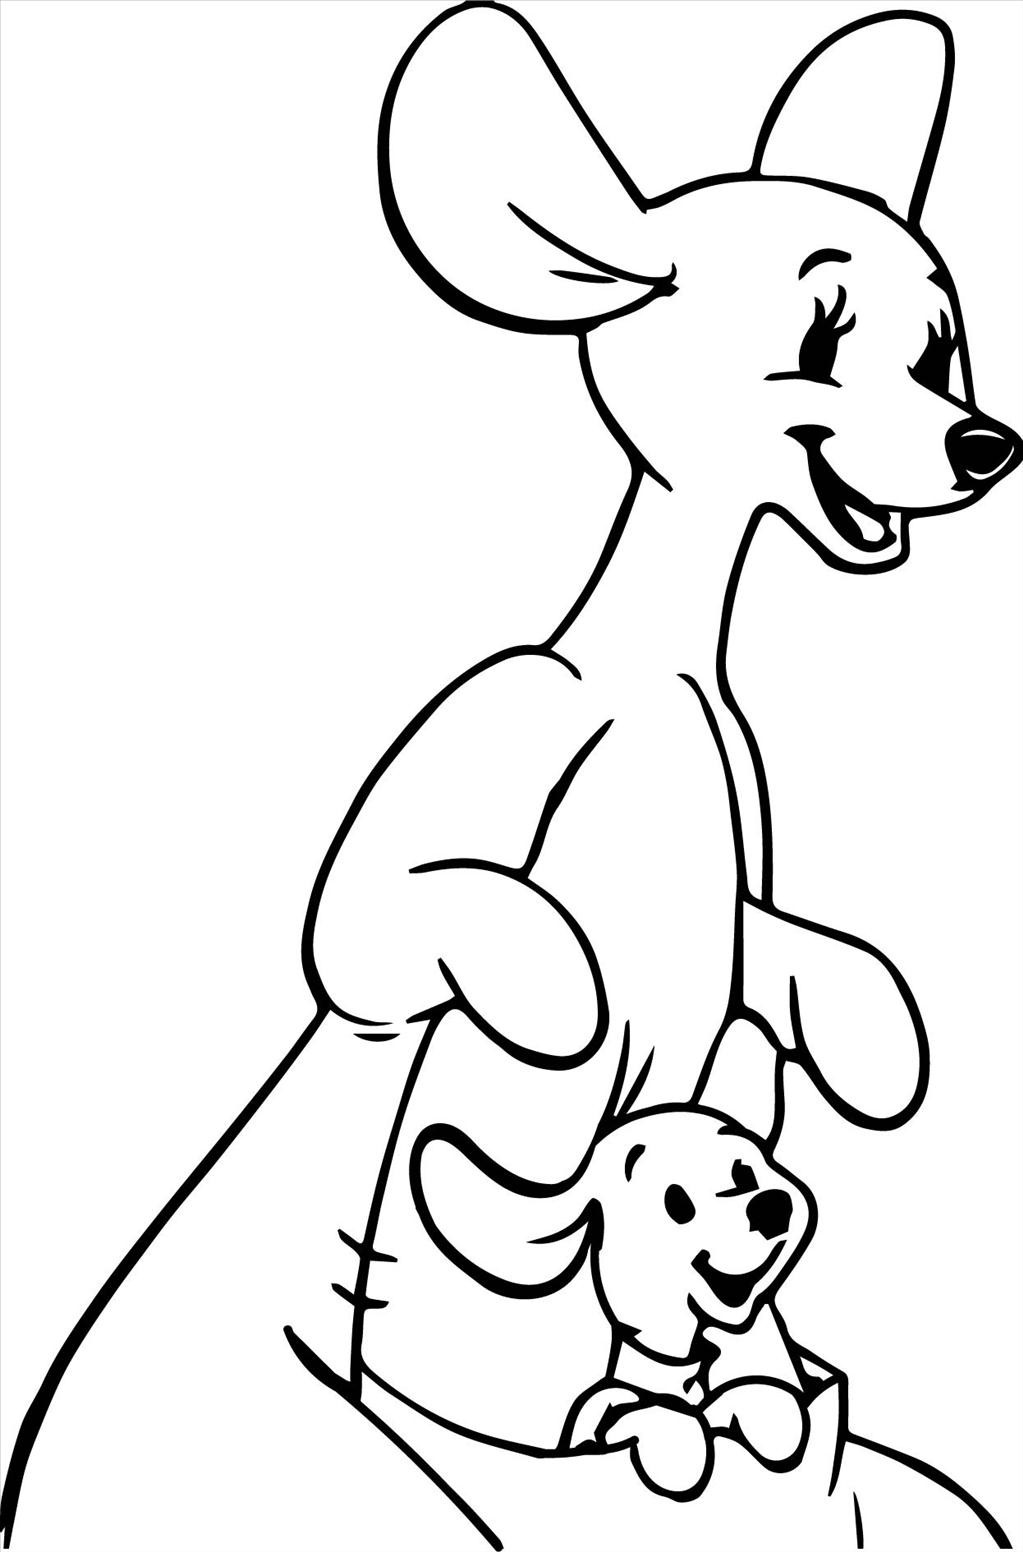 kangaroo-coloring-pages-for-kids-at-getcolorings-free-printable-colorings-pages-to-print